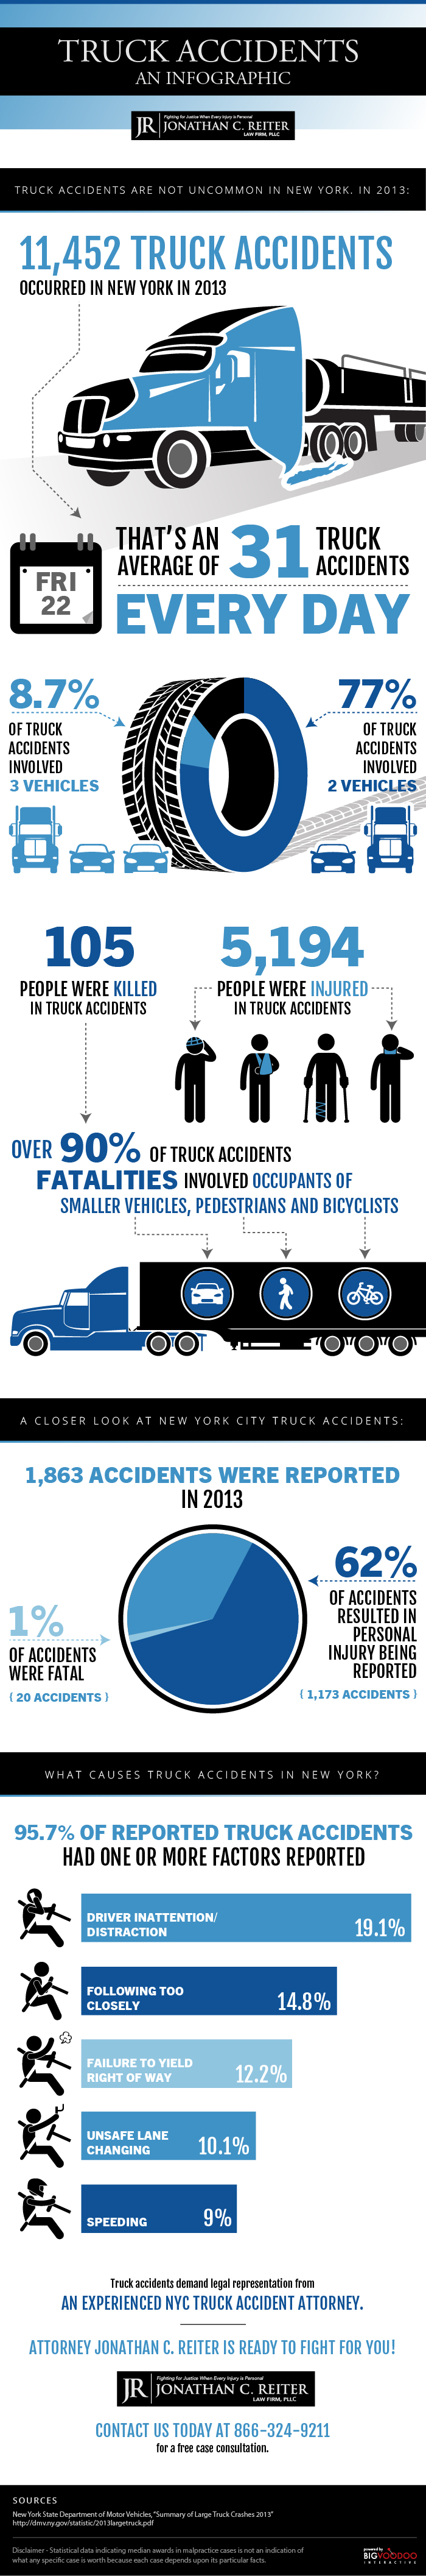 Infographic: Truck Accidents